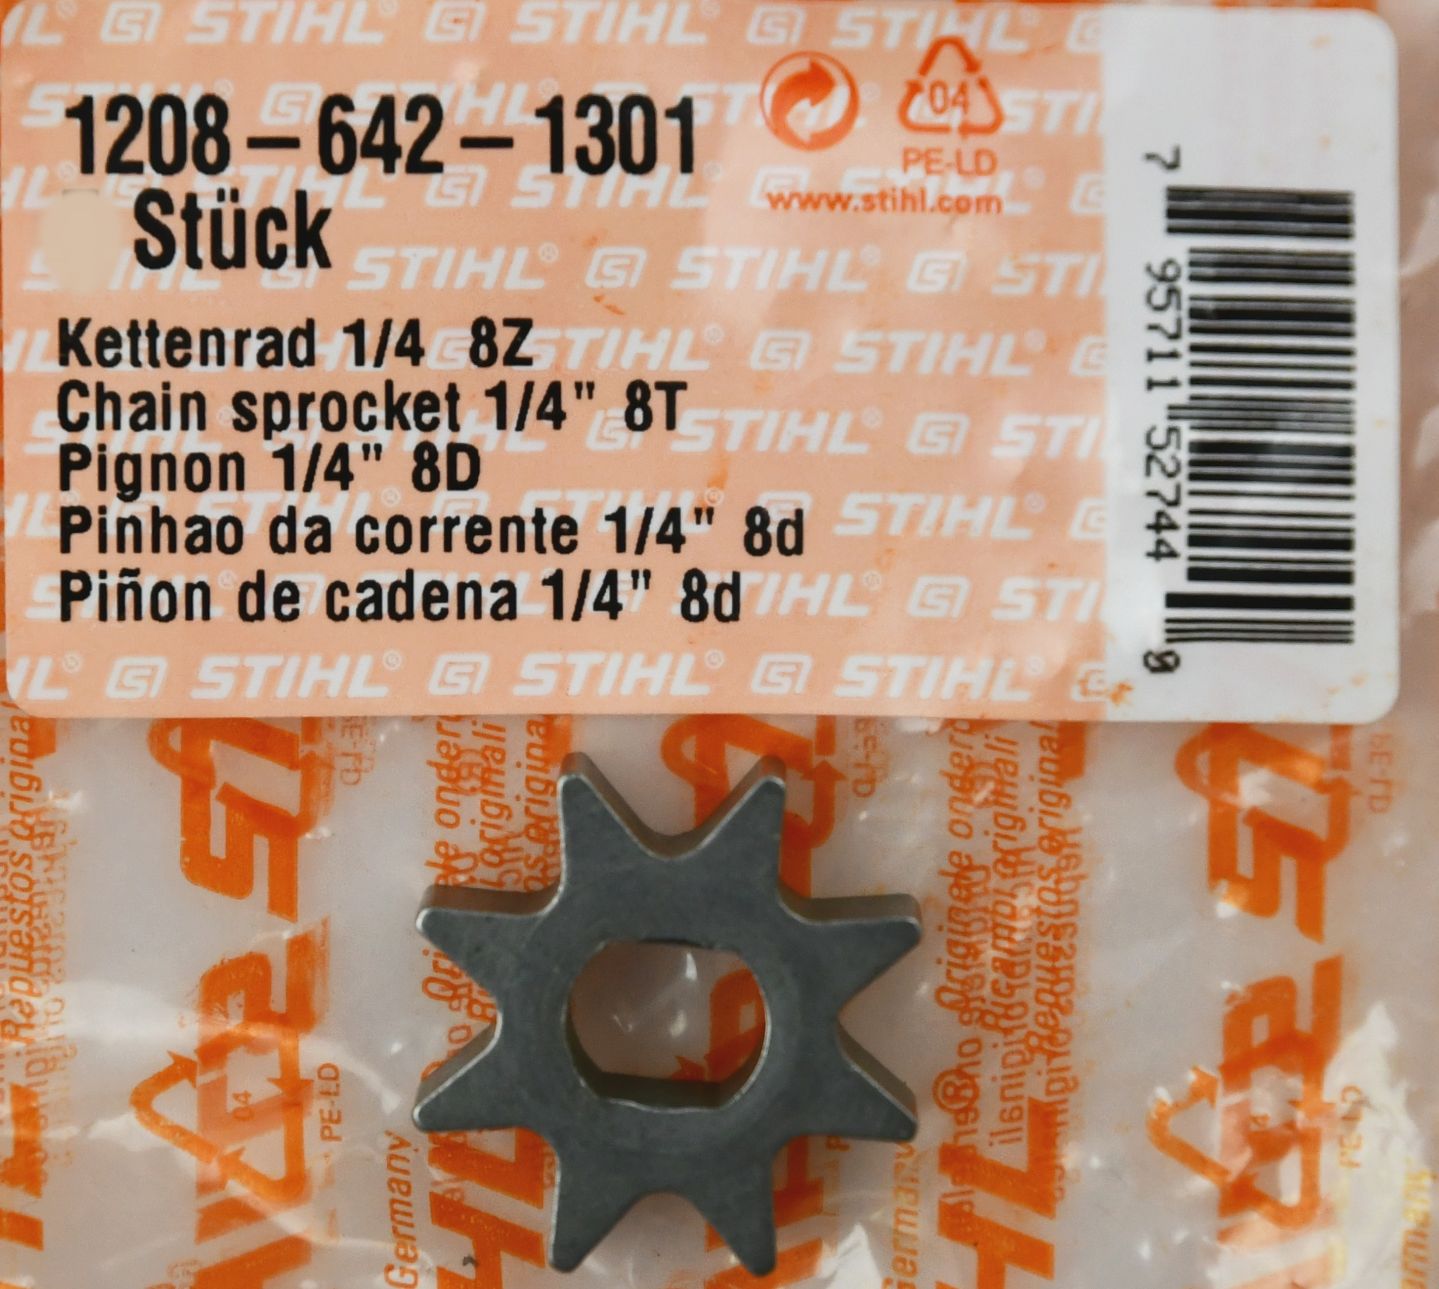 Stihl  12086421301 Original Carving Kettenrad 1/4" 1208 8Z MSE140 MSE160 MSE170 MSE180 MSE200